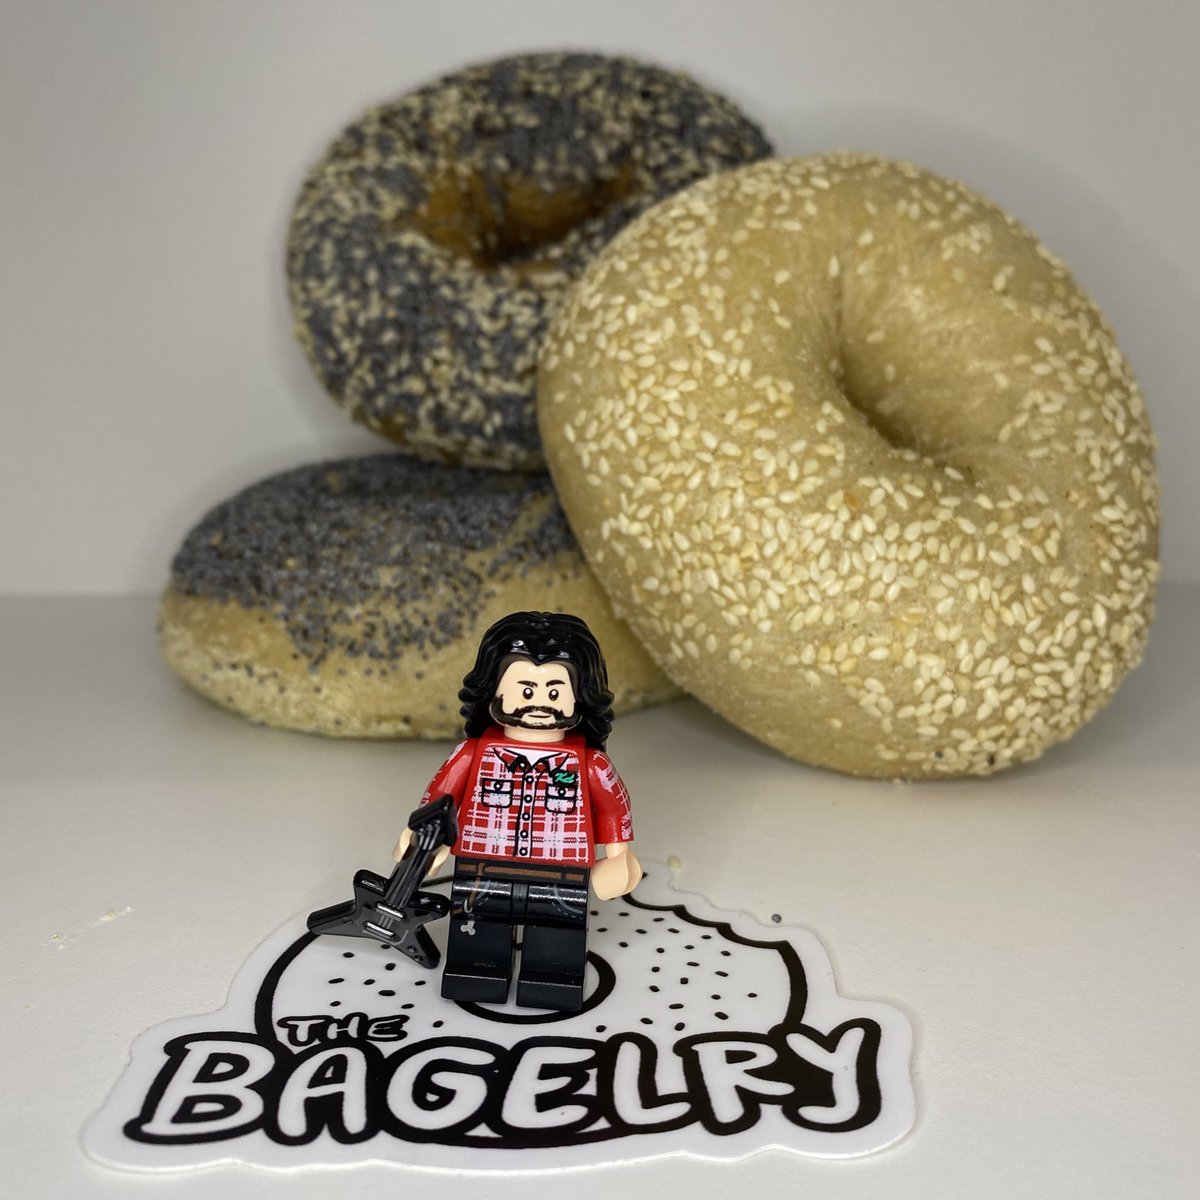 January 15th is #NationalBagelDay 🥯